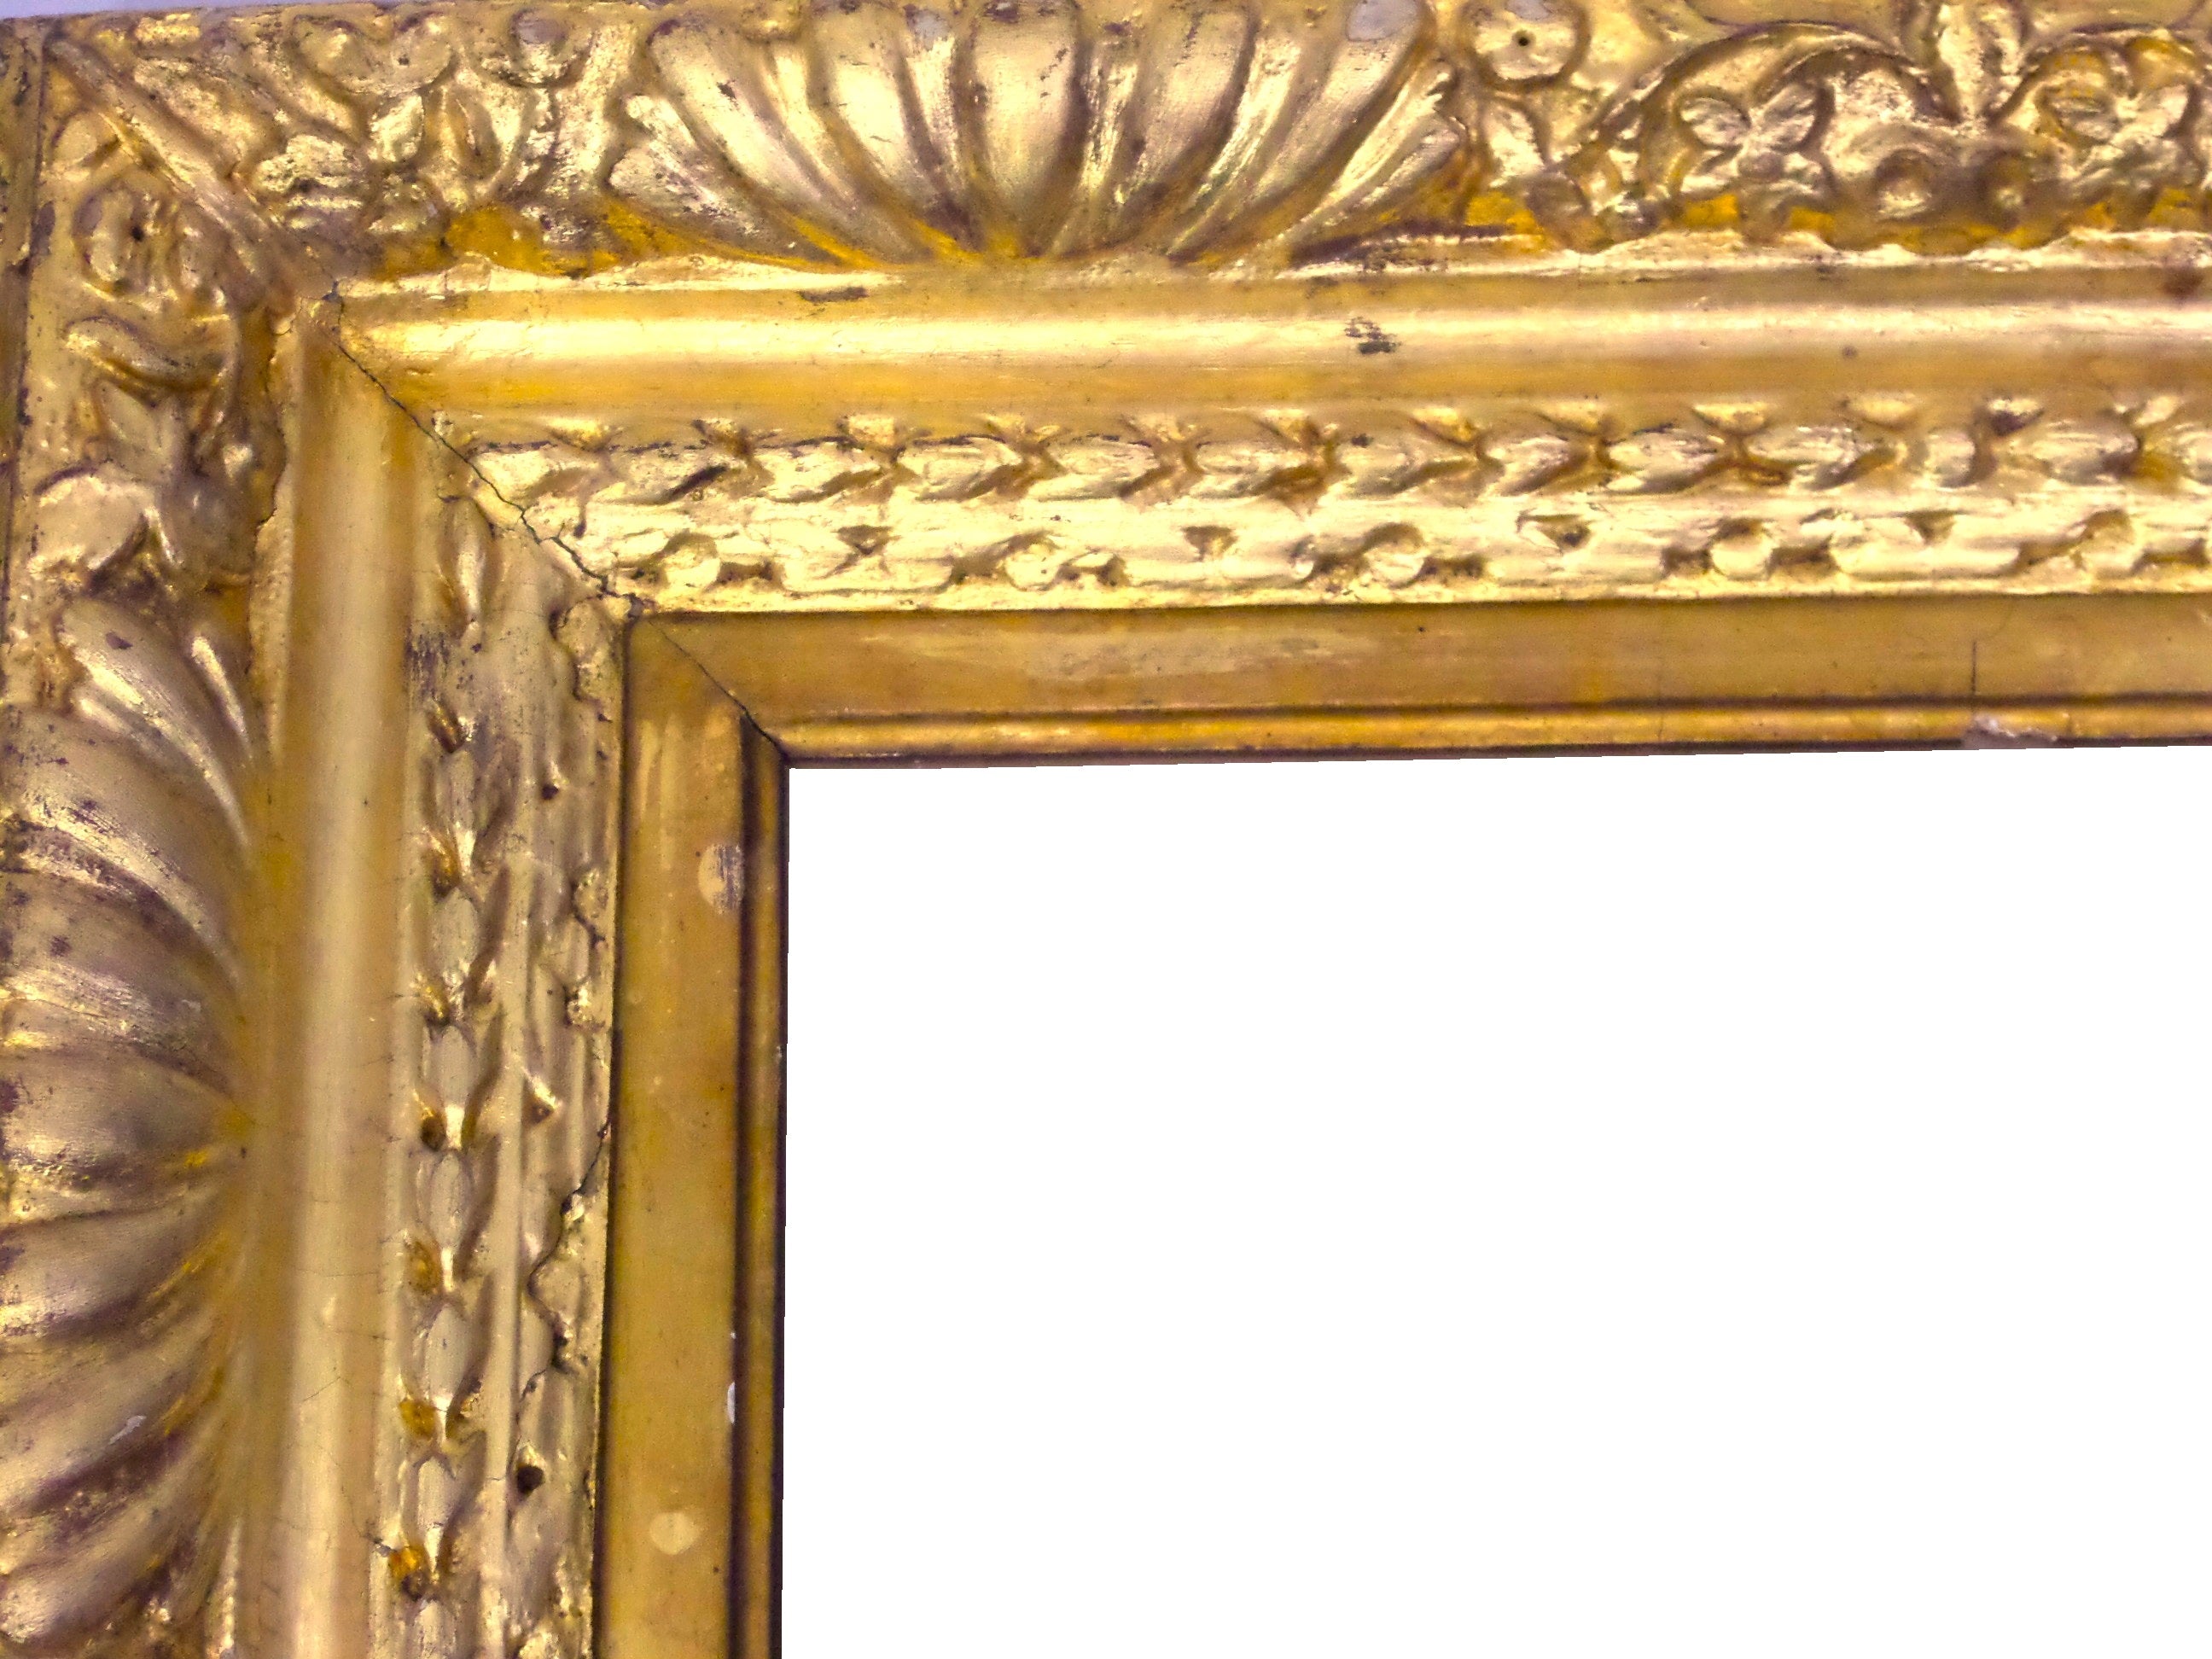 ORIGINAL 18TH CENTURY CARVED GILTWOOD PICTURE FRAME